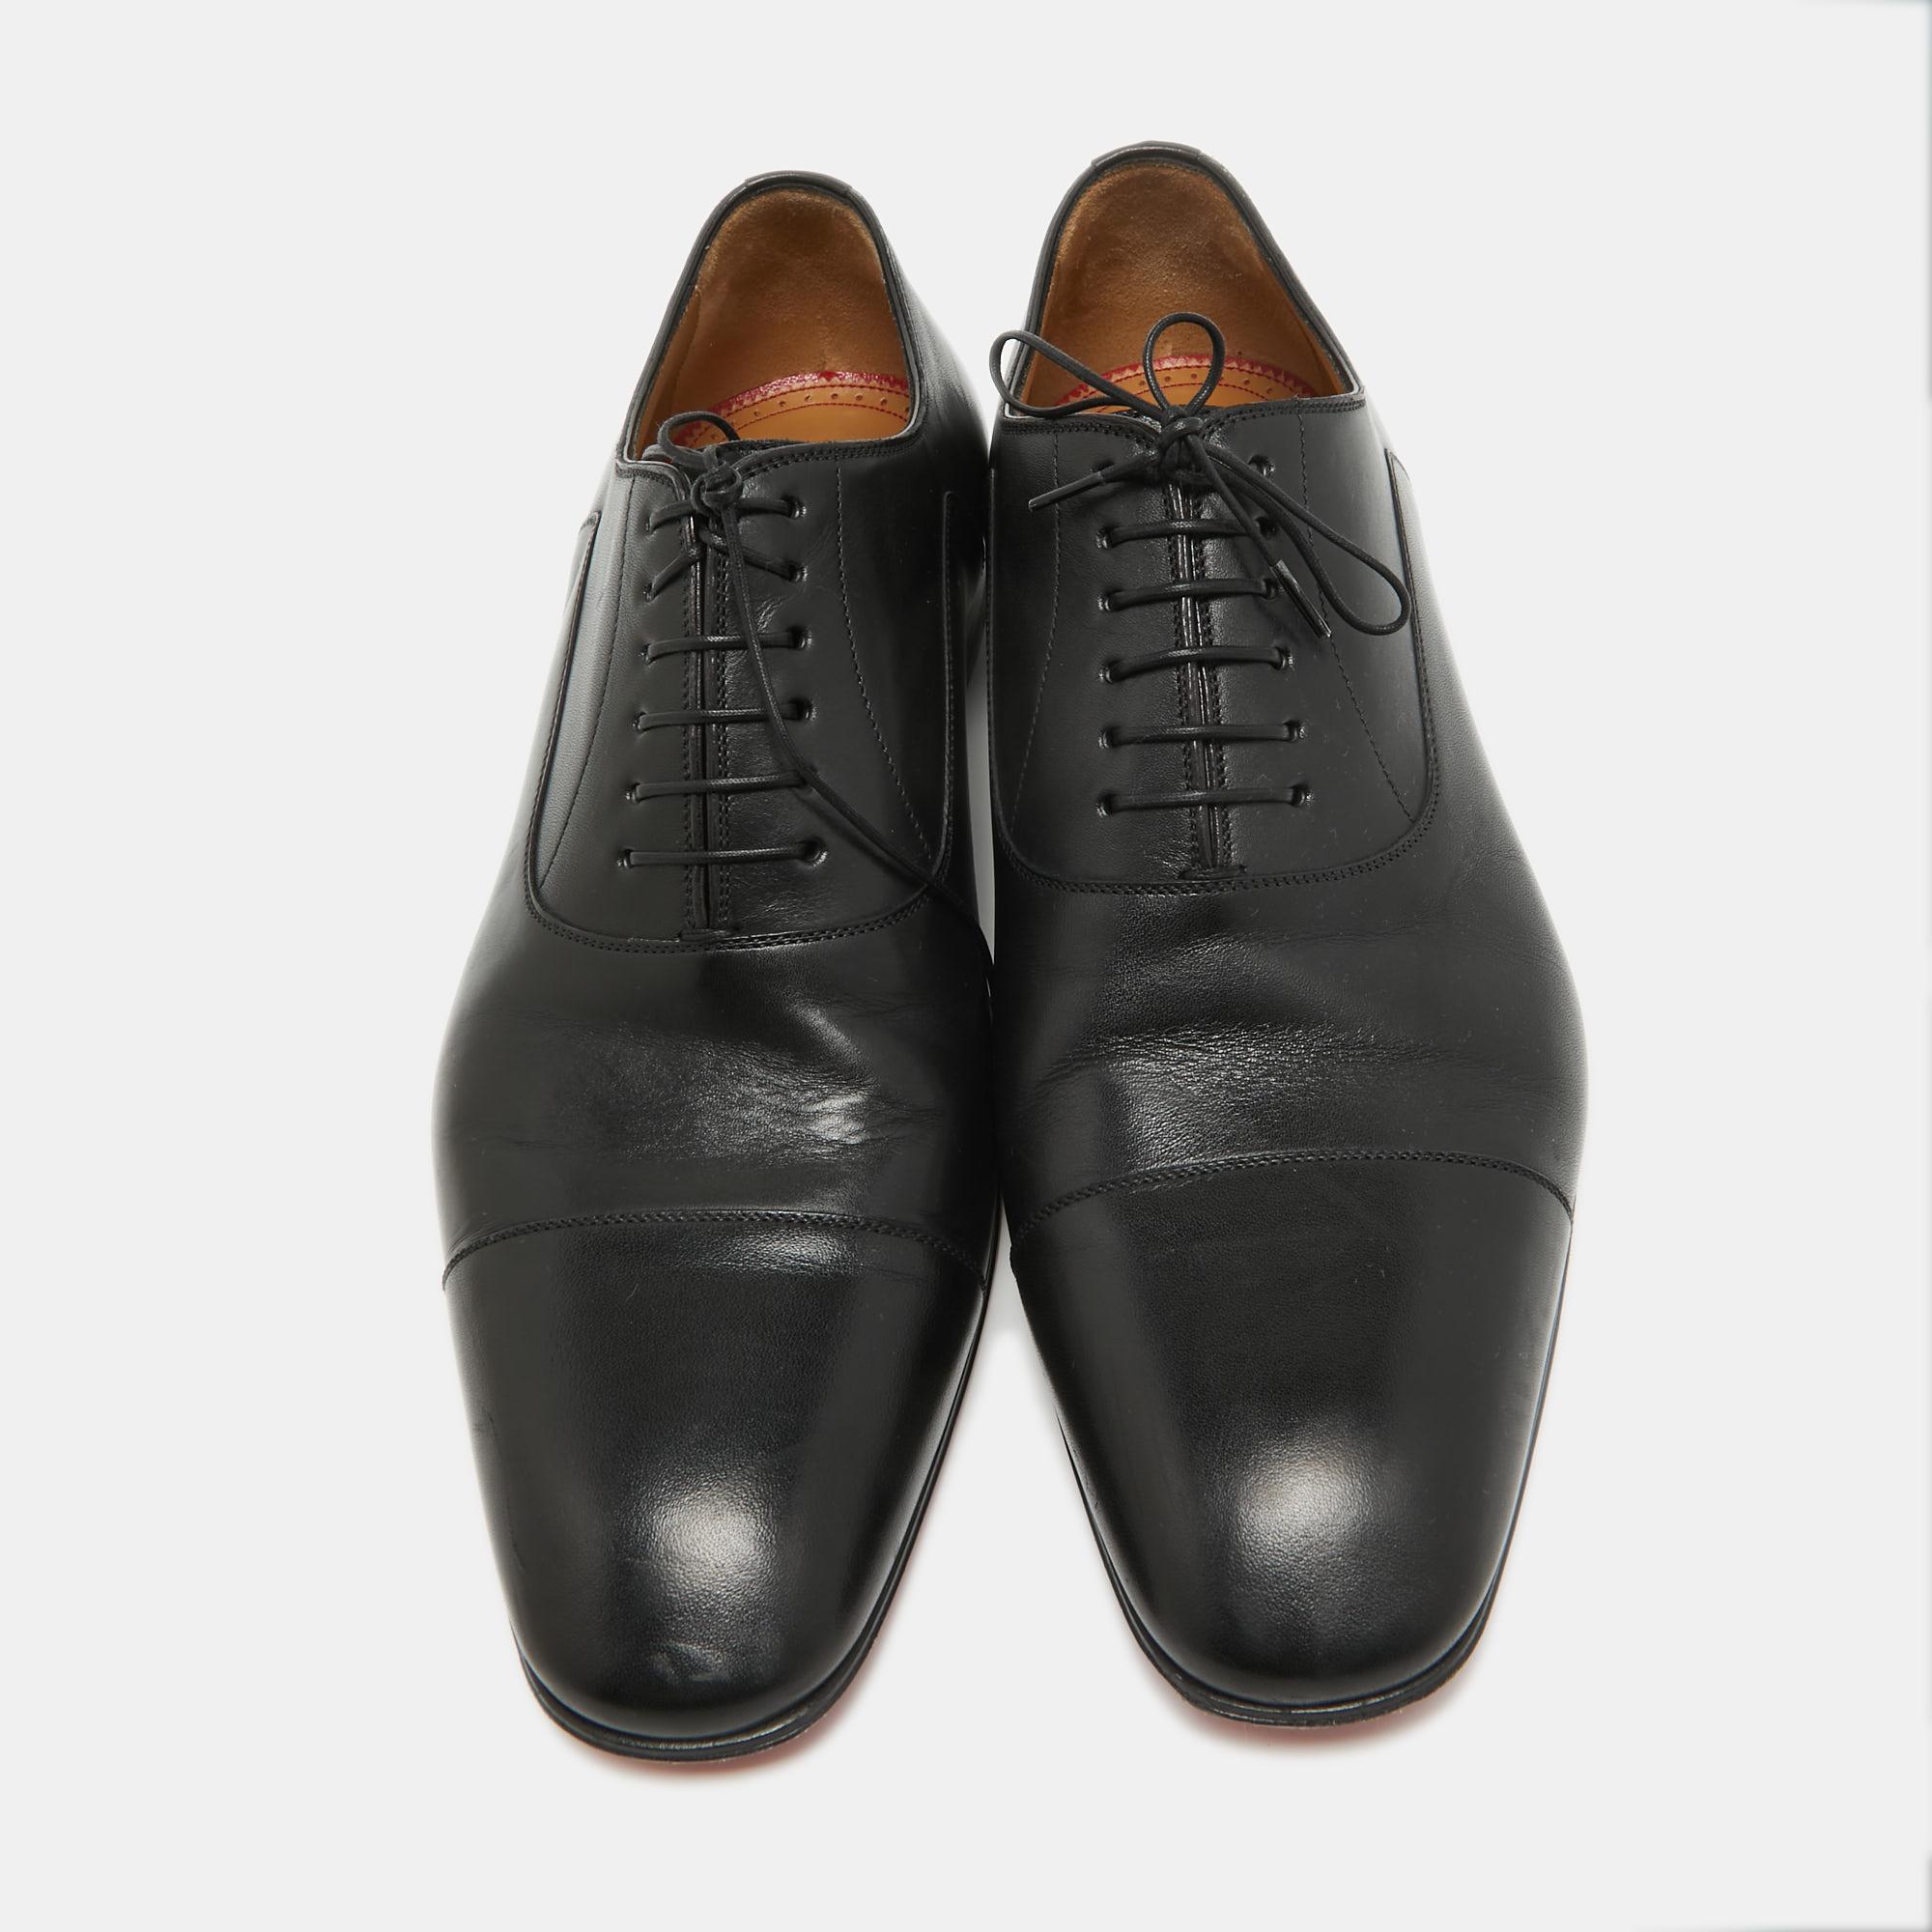 You'll find this pair of Christian Louboutin oxfords for men an essential addition to your shoe collection. Crafted immaculately, the shoes are constructed to give you a polished look.

Includes: Original Dustbag, Original Box, Extra Laces, Invoice